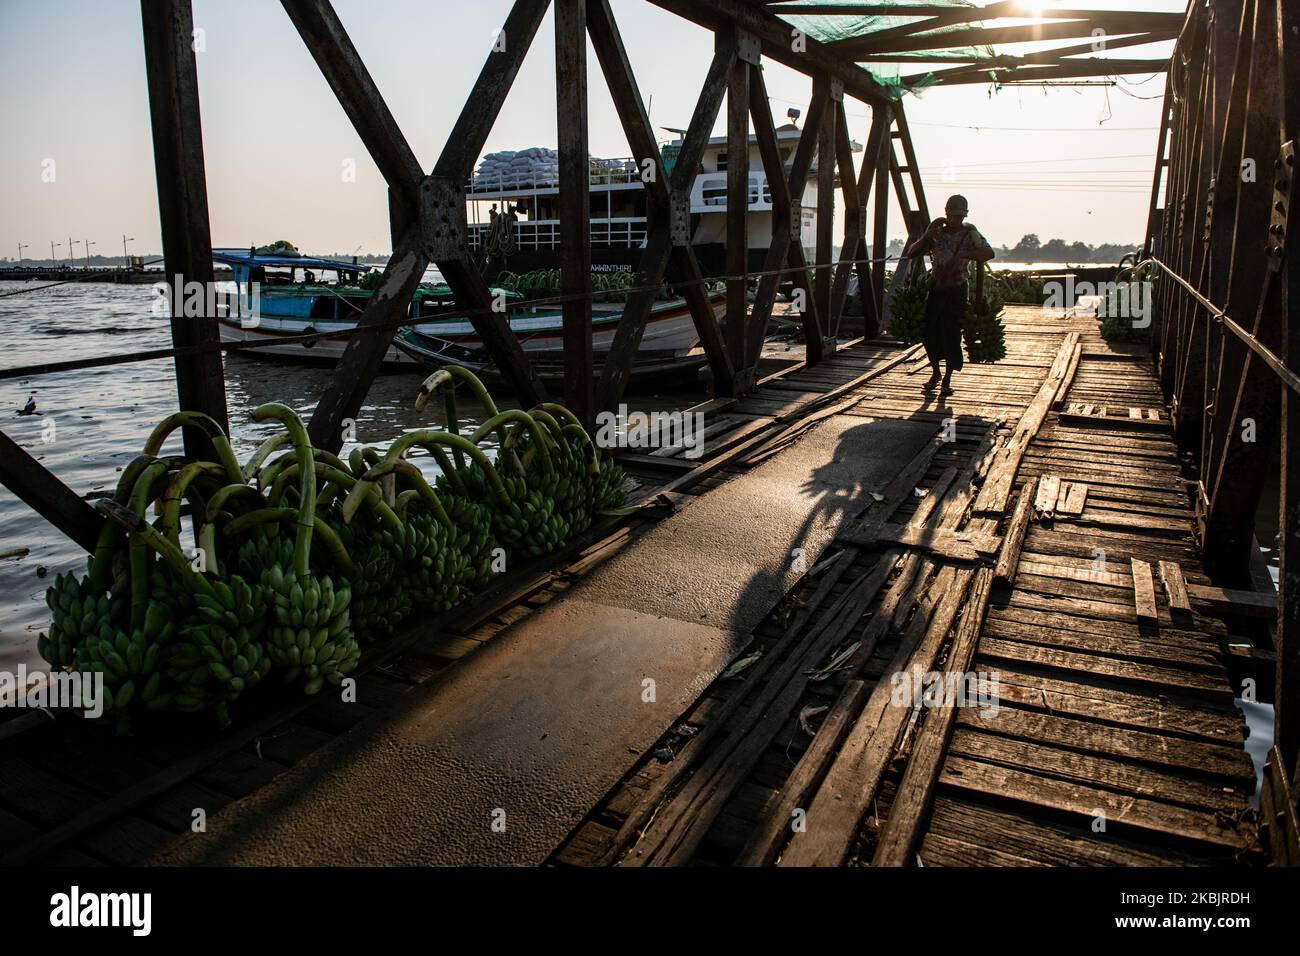 A man carries bananas unloaded from a boat at a jetty in Yangon, Myanmar on March 10, 2020. (Photo by Shwe Paw Mya Tin/NurPhoto) Stock Photo